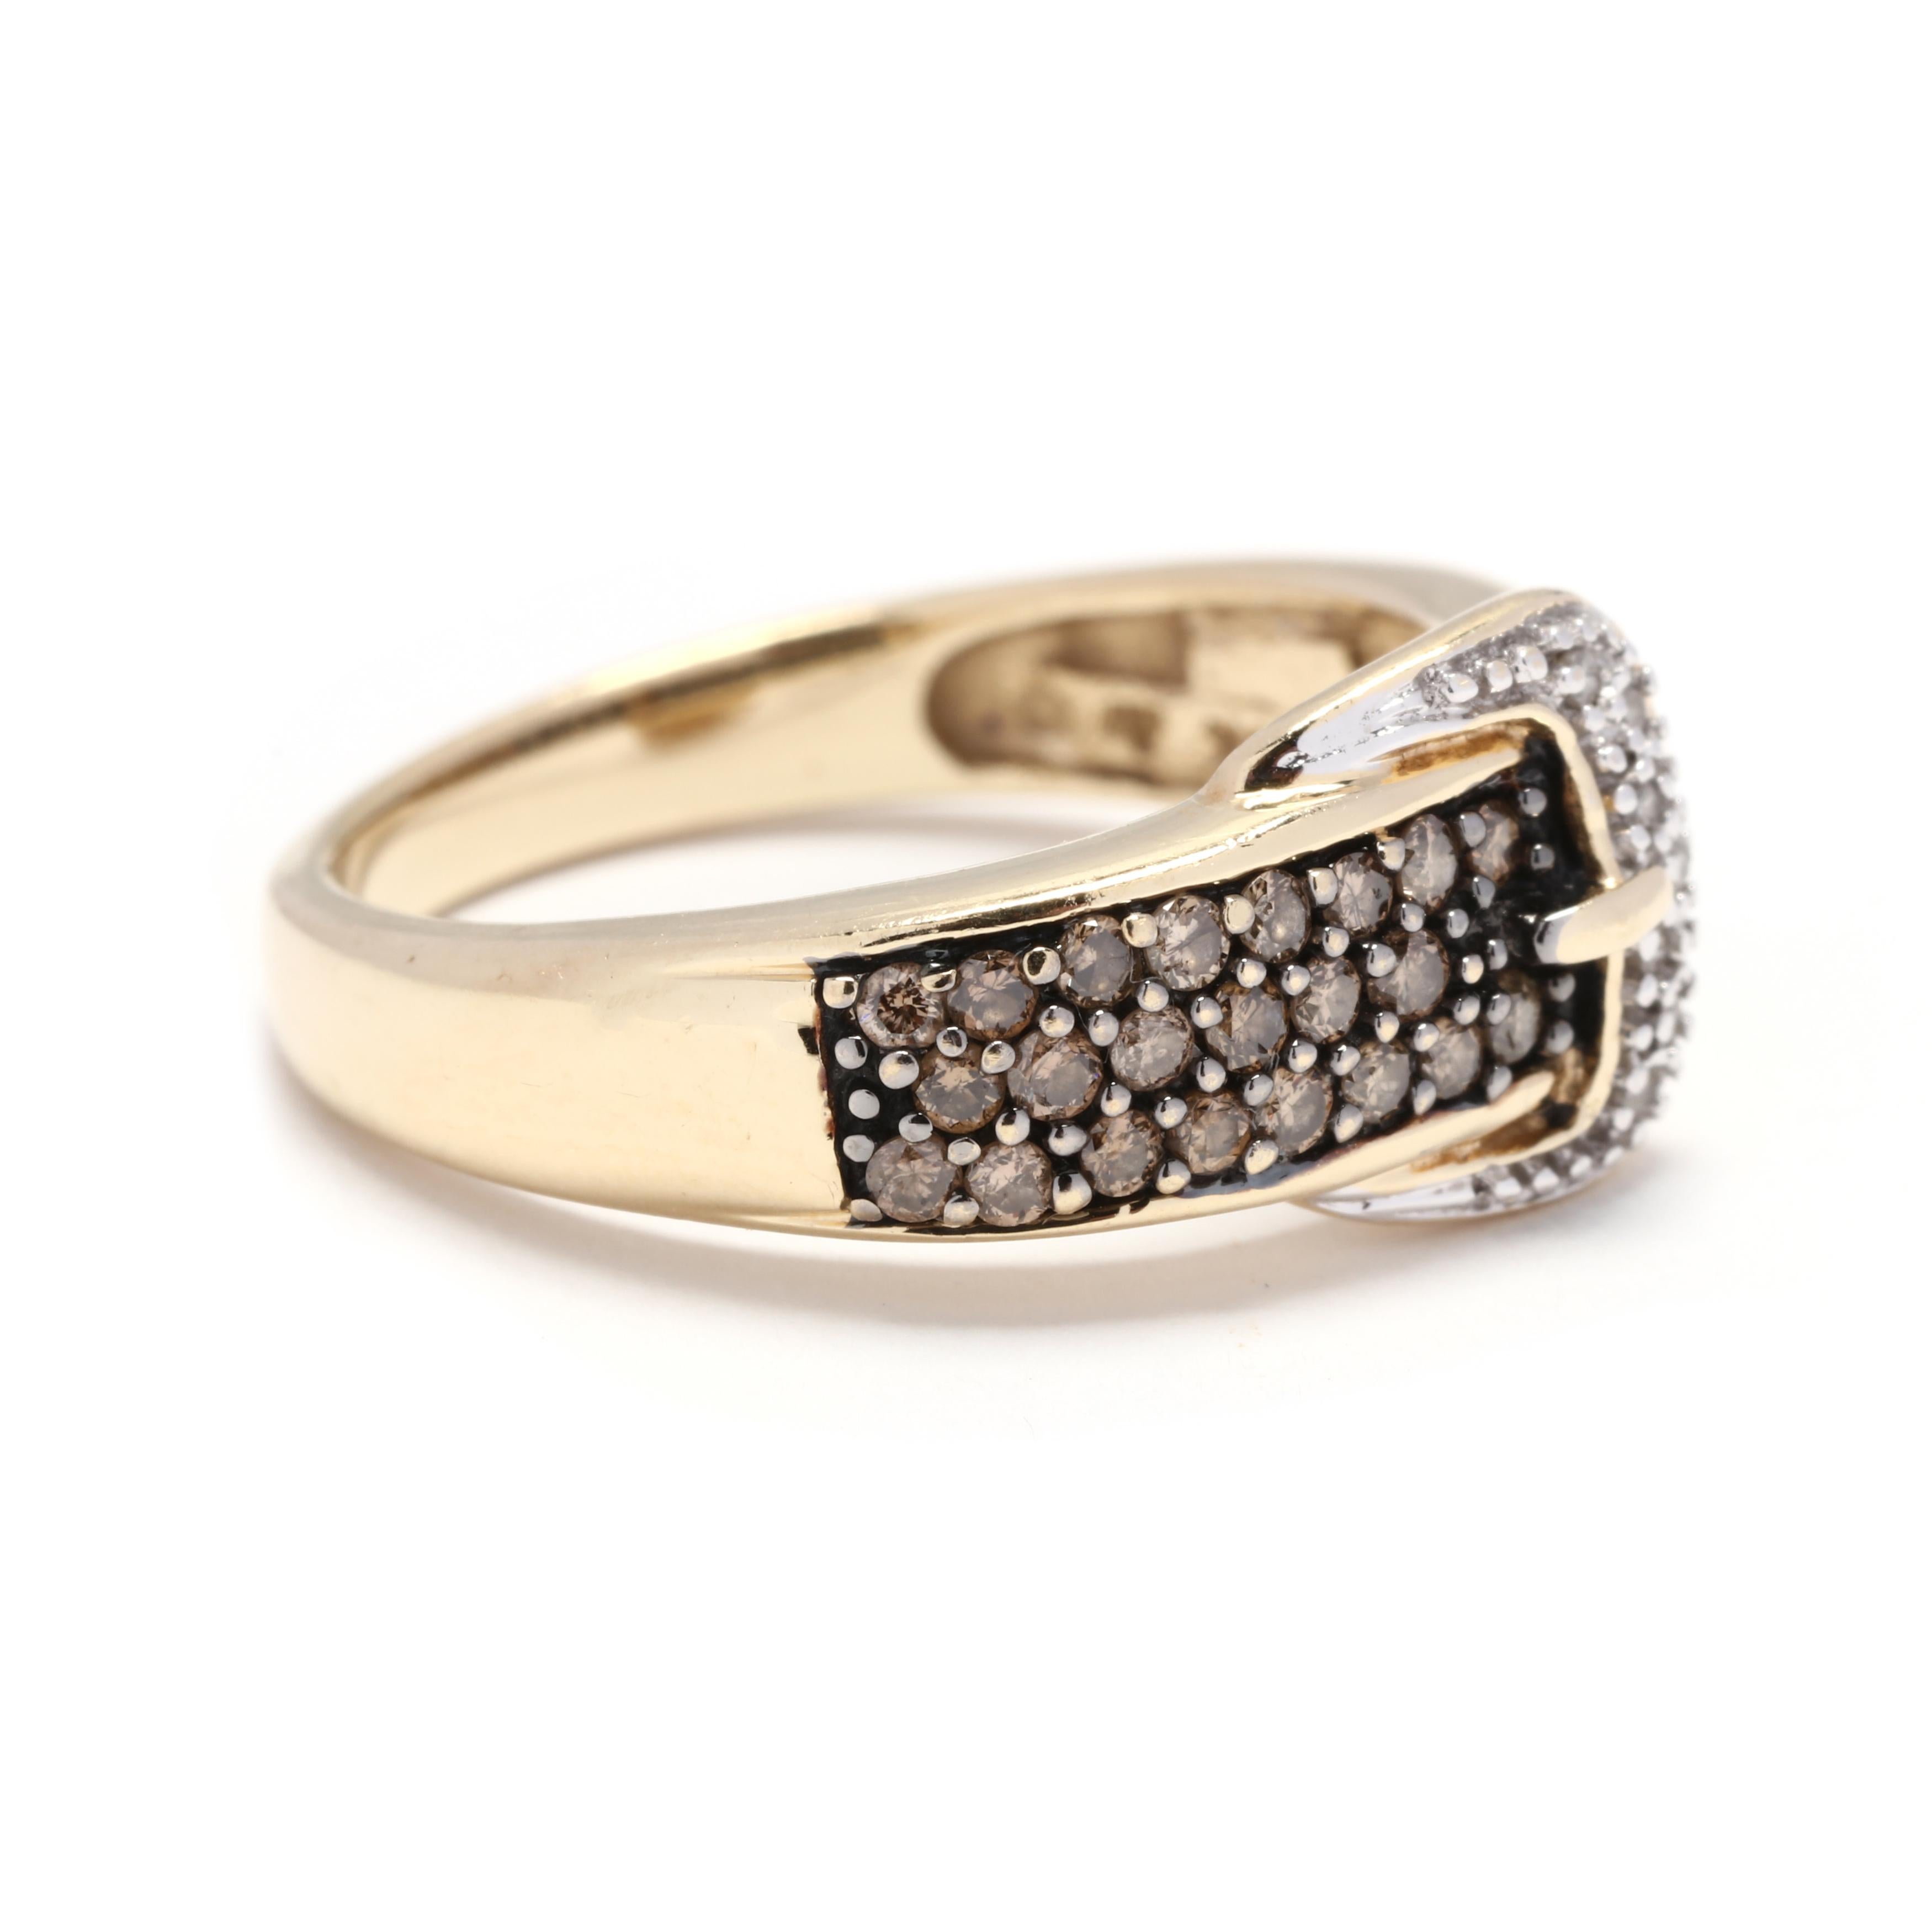 An estate 14 karat yellow and white gold diamond buckle band ring. This ring features a buckle motif design with a white gold clasp set with colorless diamonds and with pavé set light brown diamonds on the shank.



Stones:

- colorless diamonds, 7